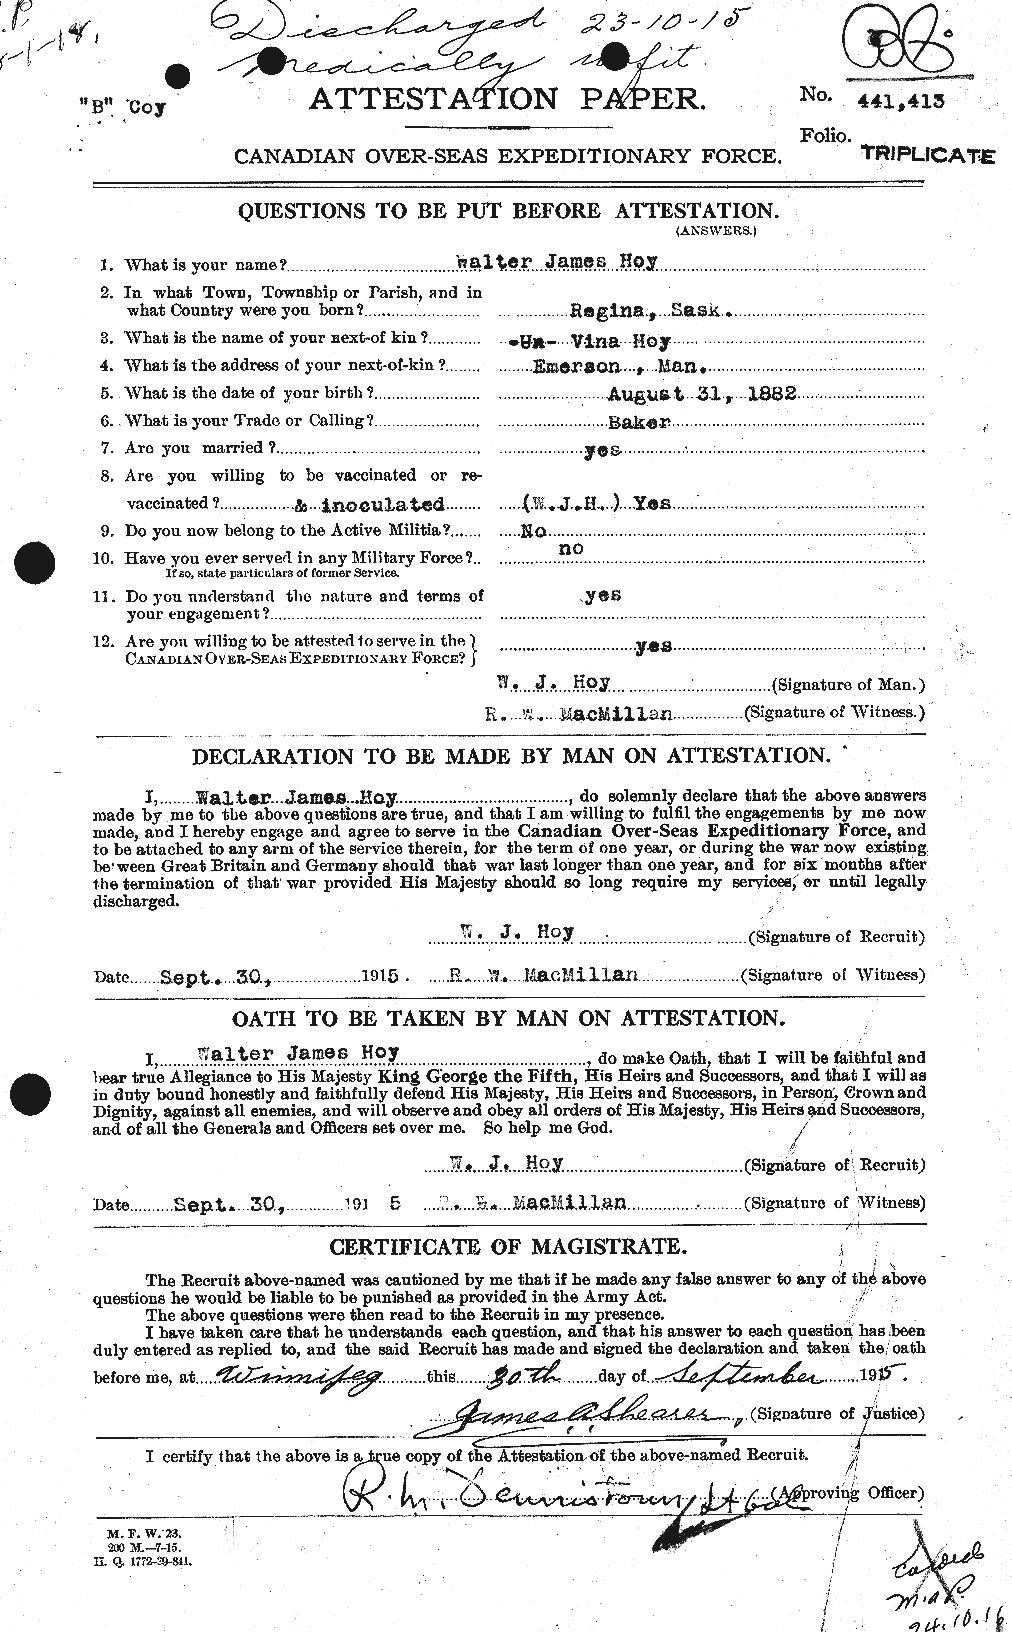 Personnel Records of the First World War - CEF 404633a